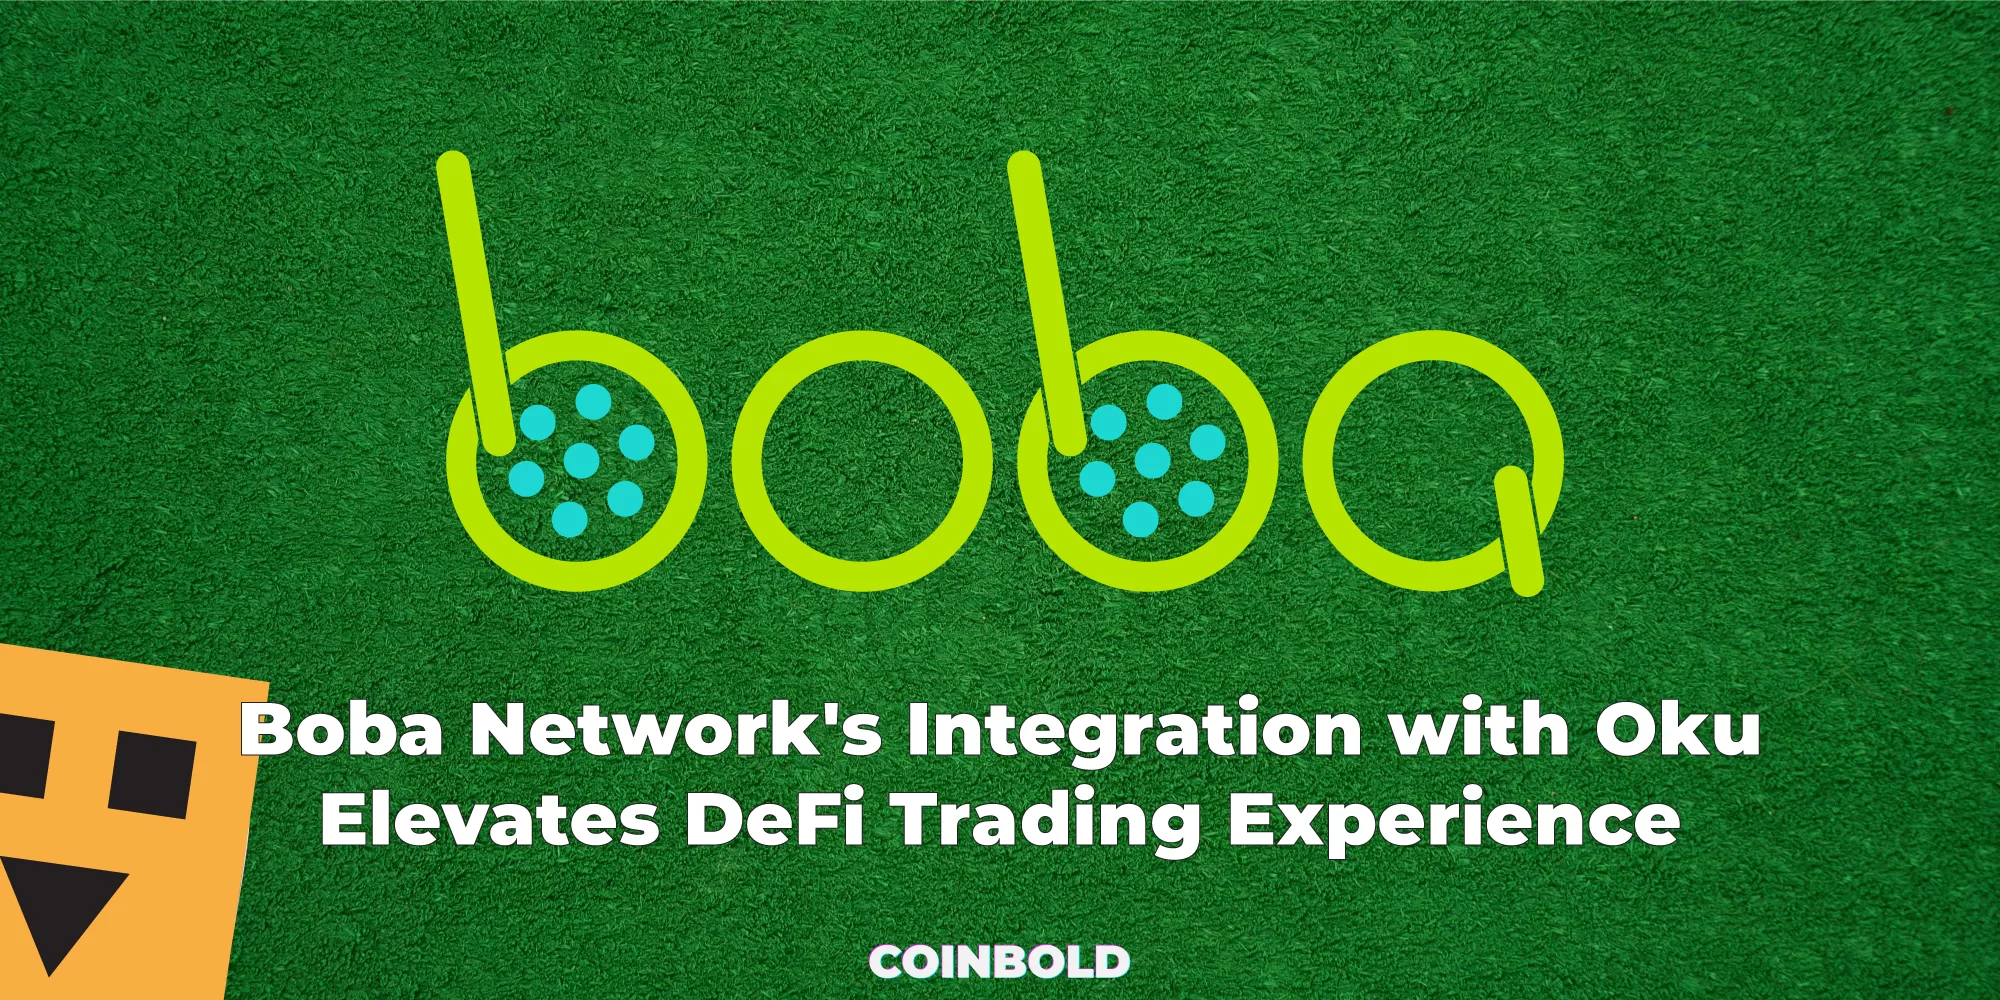 Boba Network's Integration with Oku Elevates DeFi Trading Experience